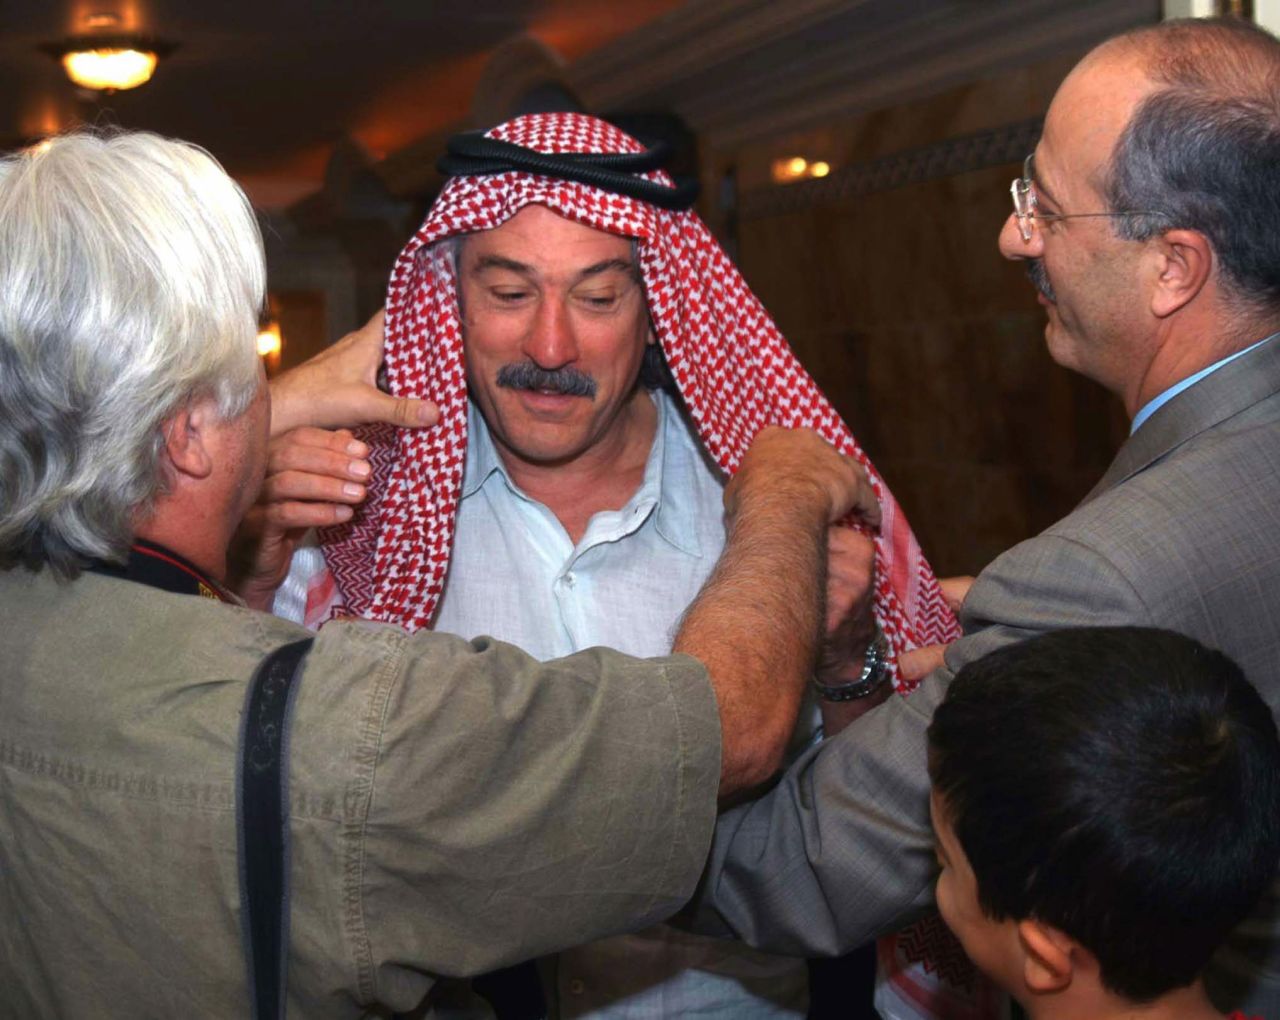 De Niro is fitted with traditional Kuwaiti dress during a US Army reception in 2003.